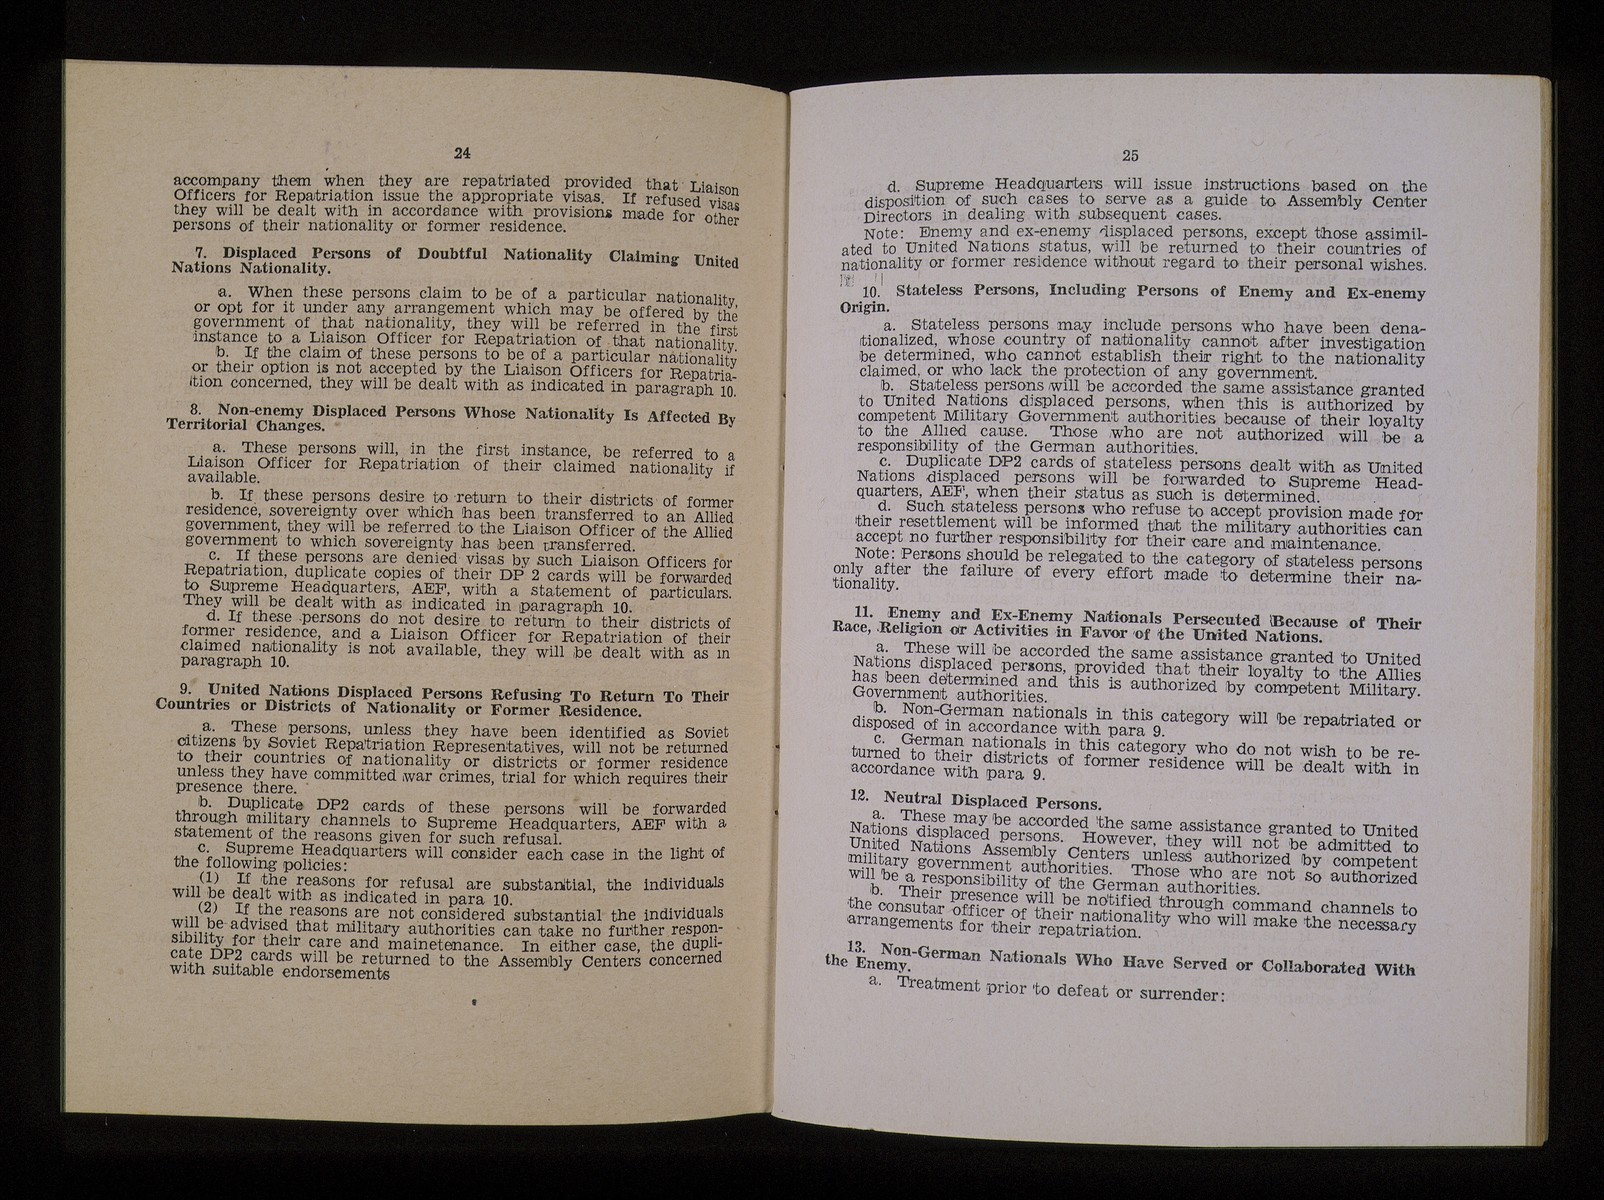 Two pages from the 89-page English "Guide to the Care of Displaced Persons in Germany" printed by the Supreme Headquarters Allied Expeditionary Force.